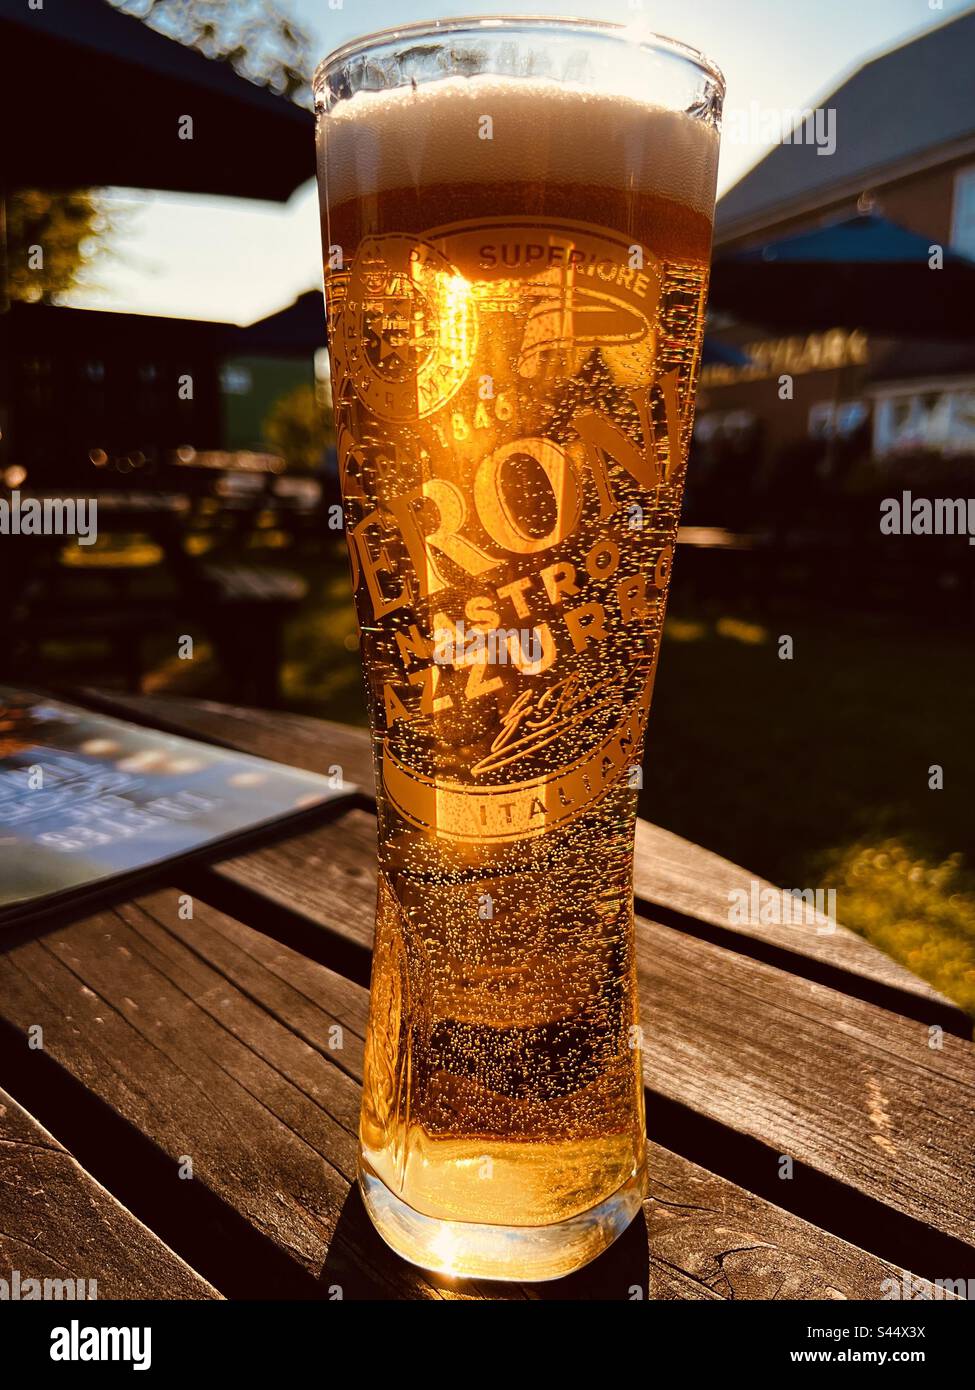 https://c8.alamy.com/comp/S44X3X/pint-of-peroni-italian-lager-in-the-summer-sunshine-at-an-english-pub-garden-at-sunset-S44X3X.jpg